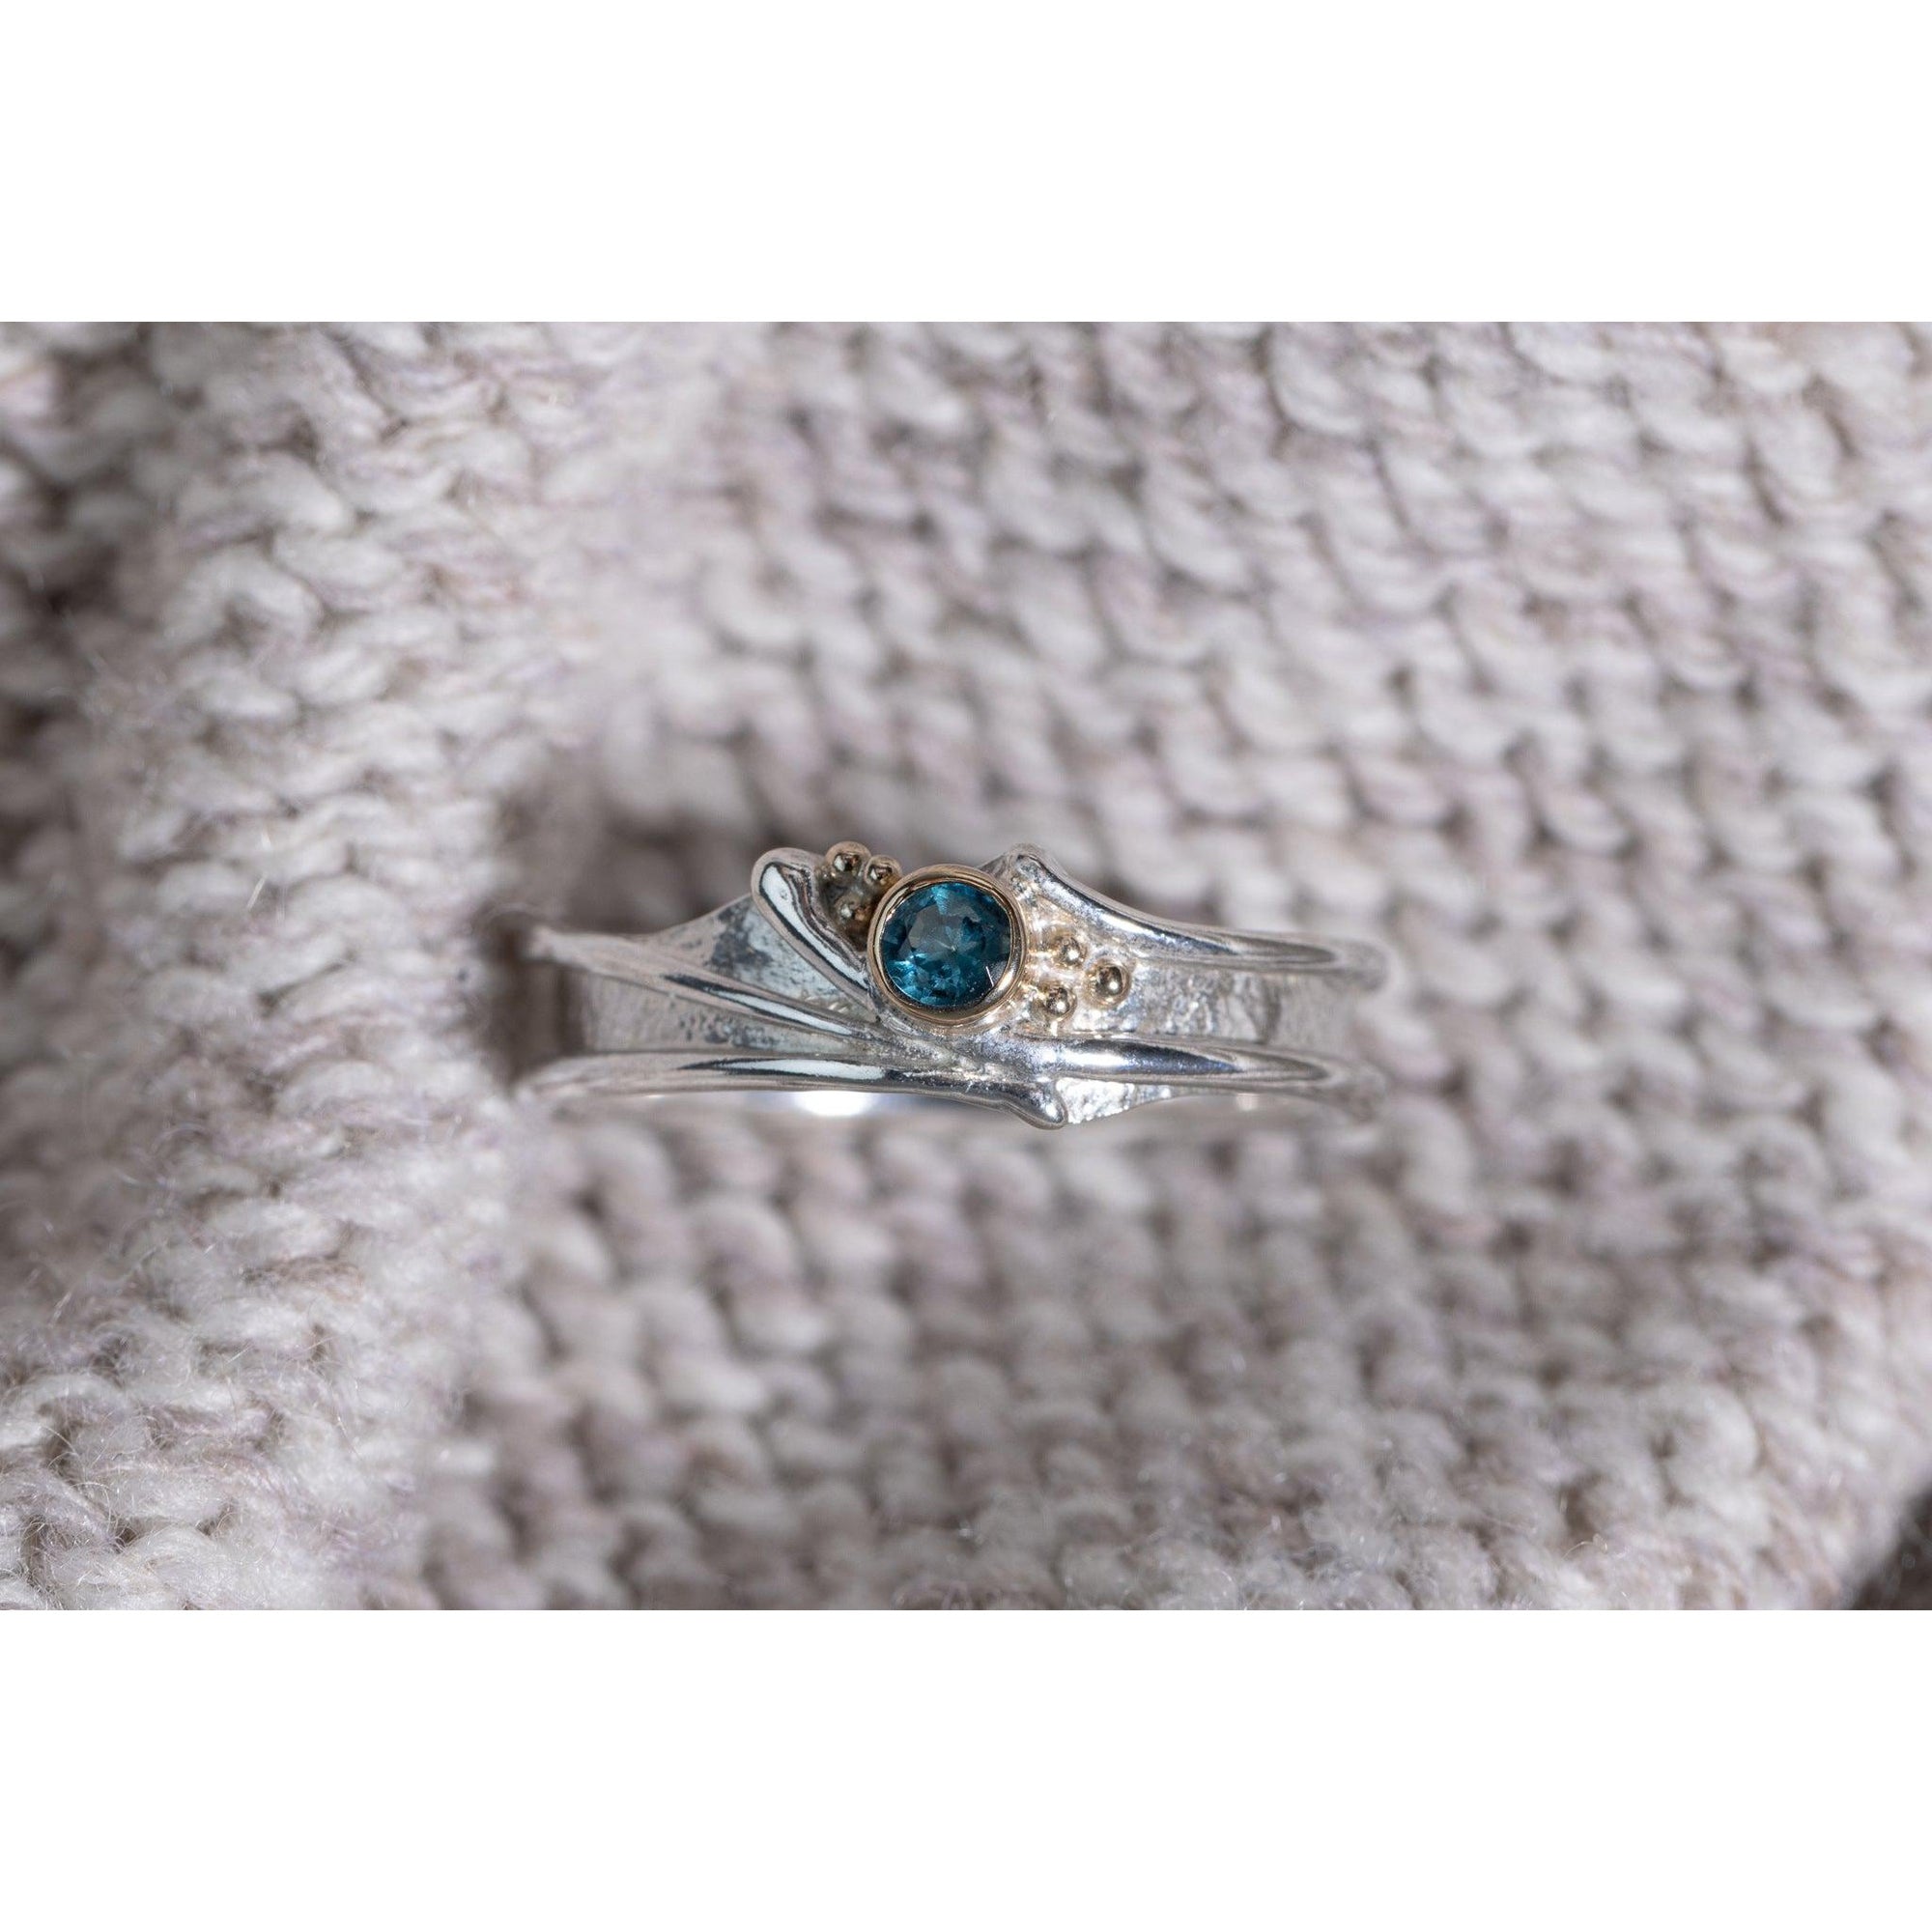 'LG62 - Silver Ring with 9ct Gold 3.5mm London Blue Topaz Ring ' by Les Grimshaw, available at Padstow Gallery, Cornwall